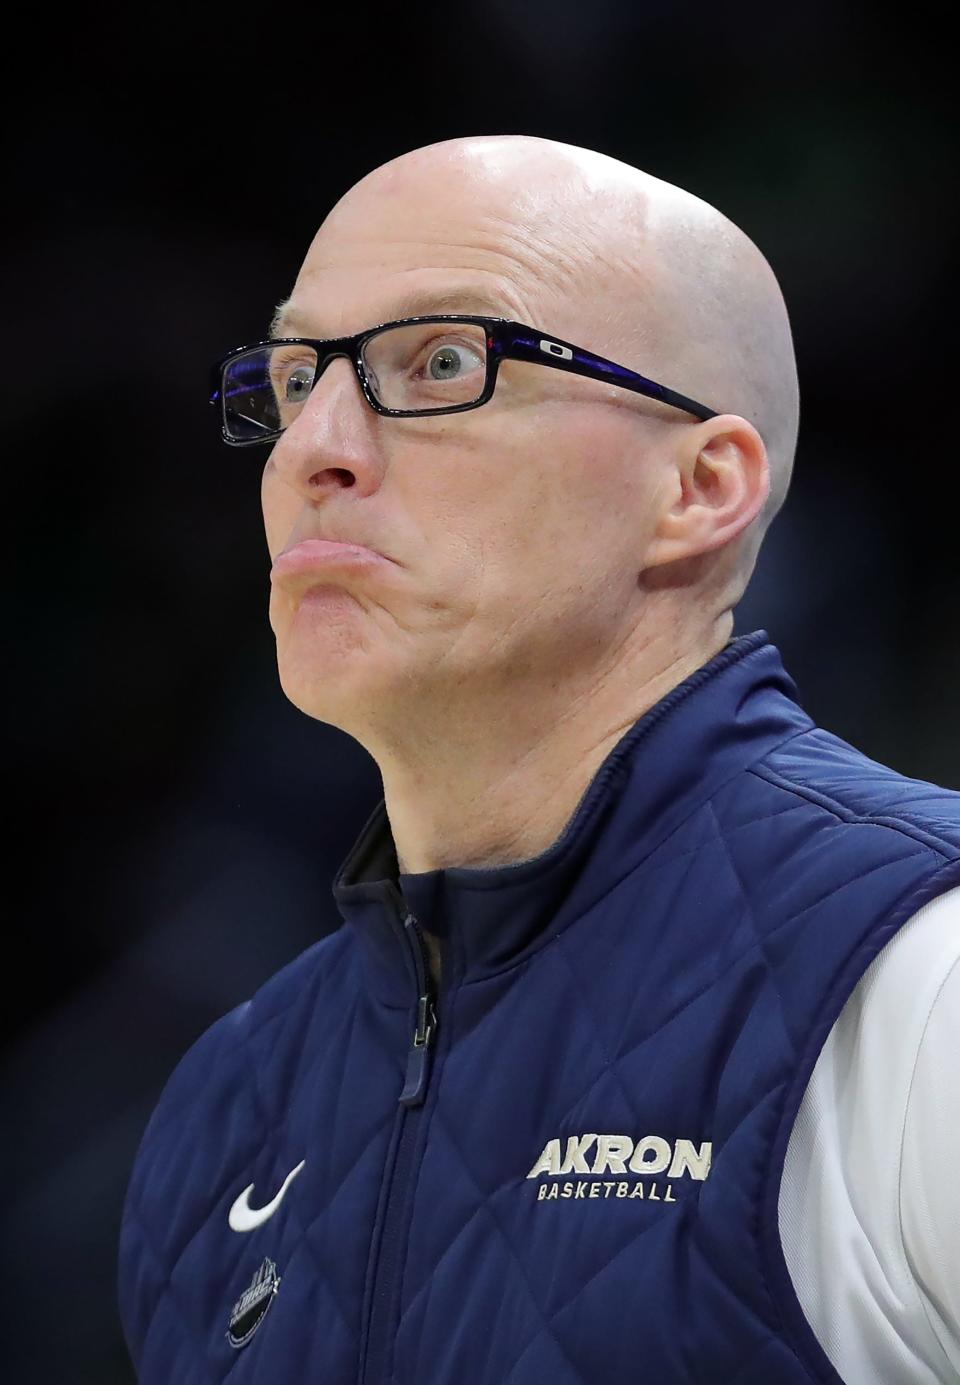 Akron coach John Groce reacts to a missed free throw during the second half against Ohio in the semifinals of the Mid-American Conference Tournament on Friday in Cleveland.